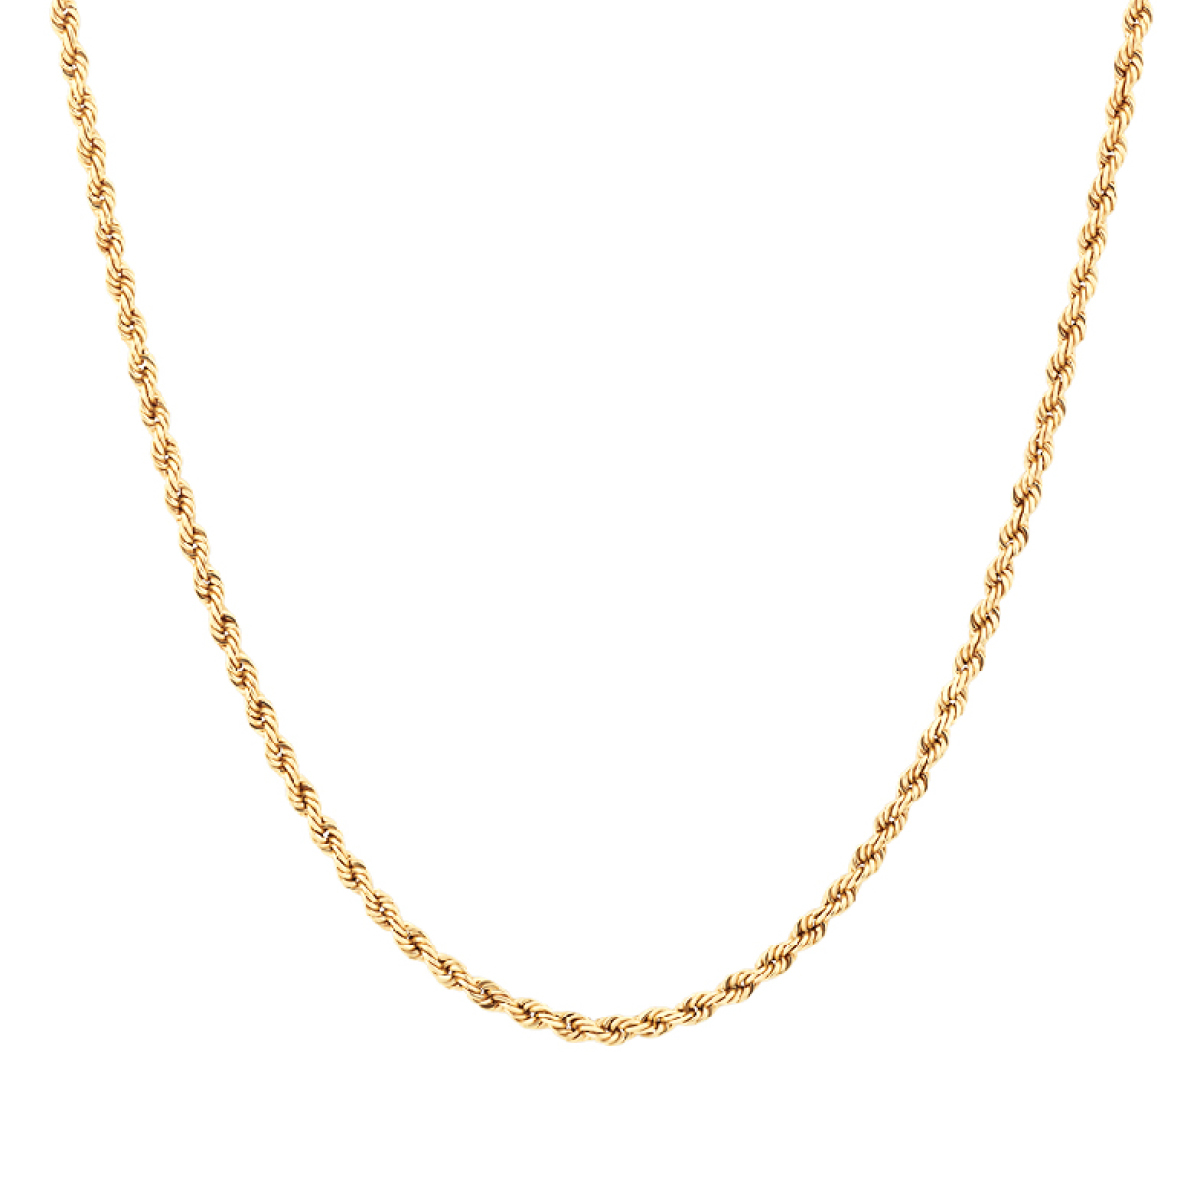 50cm Rope Chain in 10kt Gold